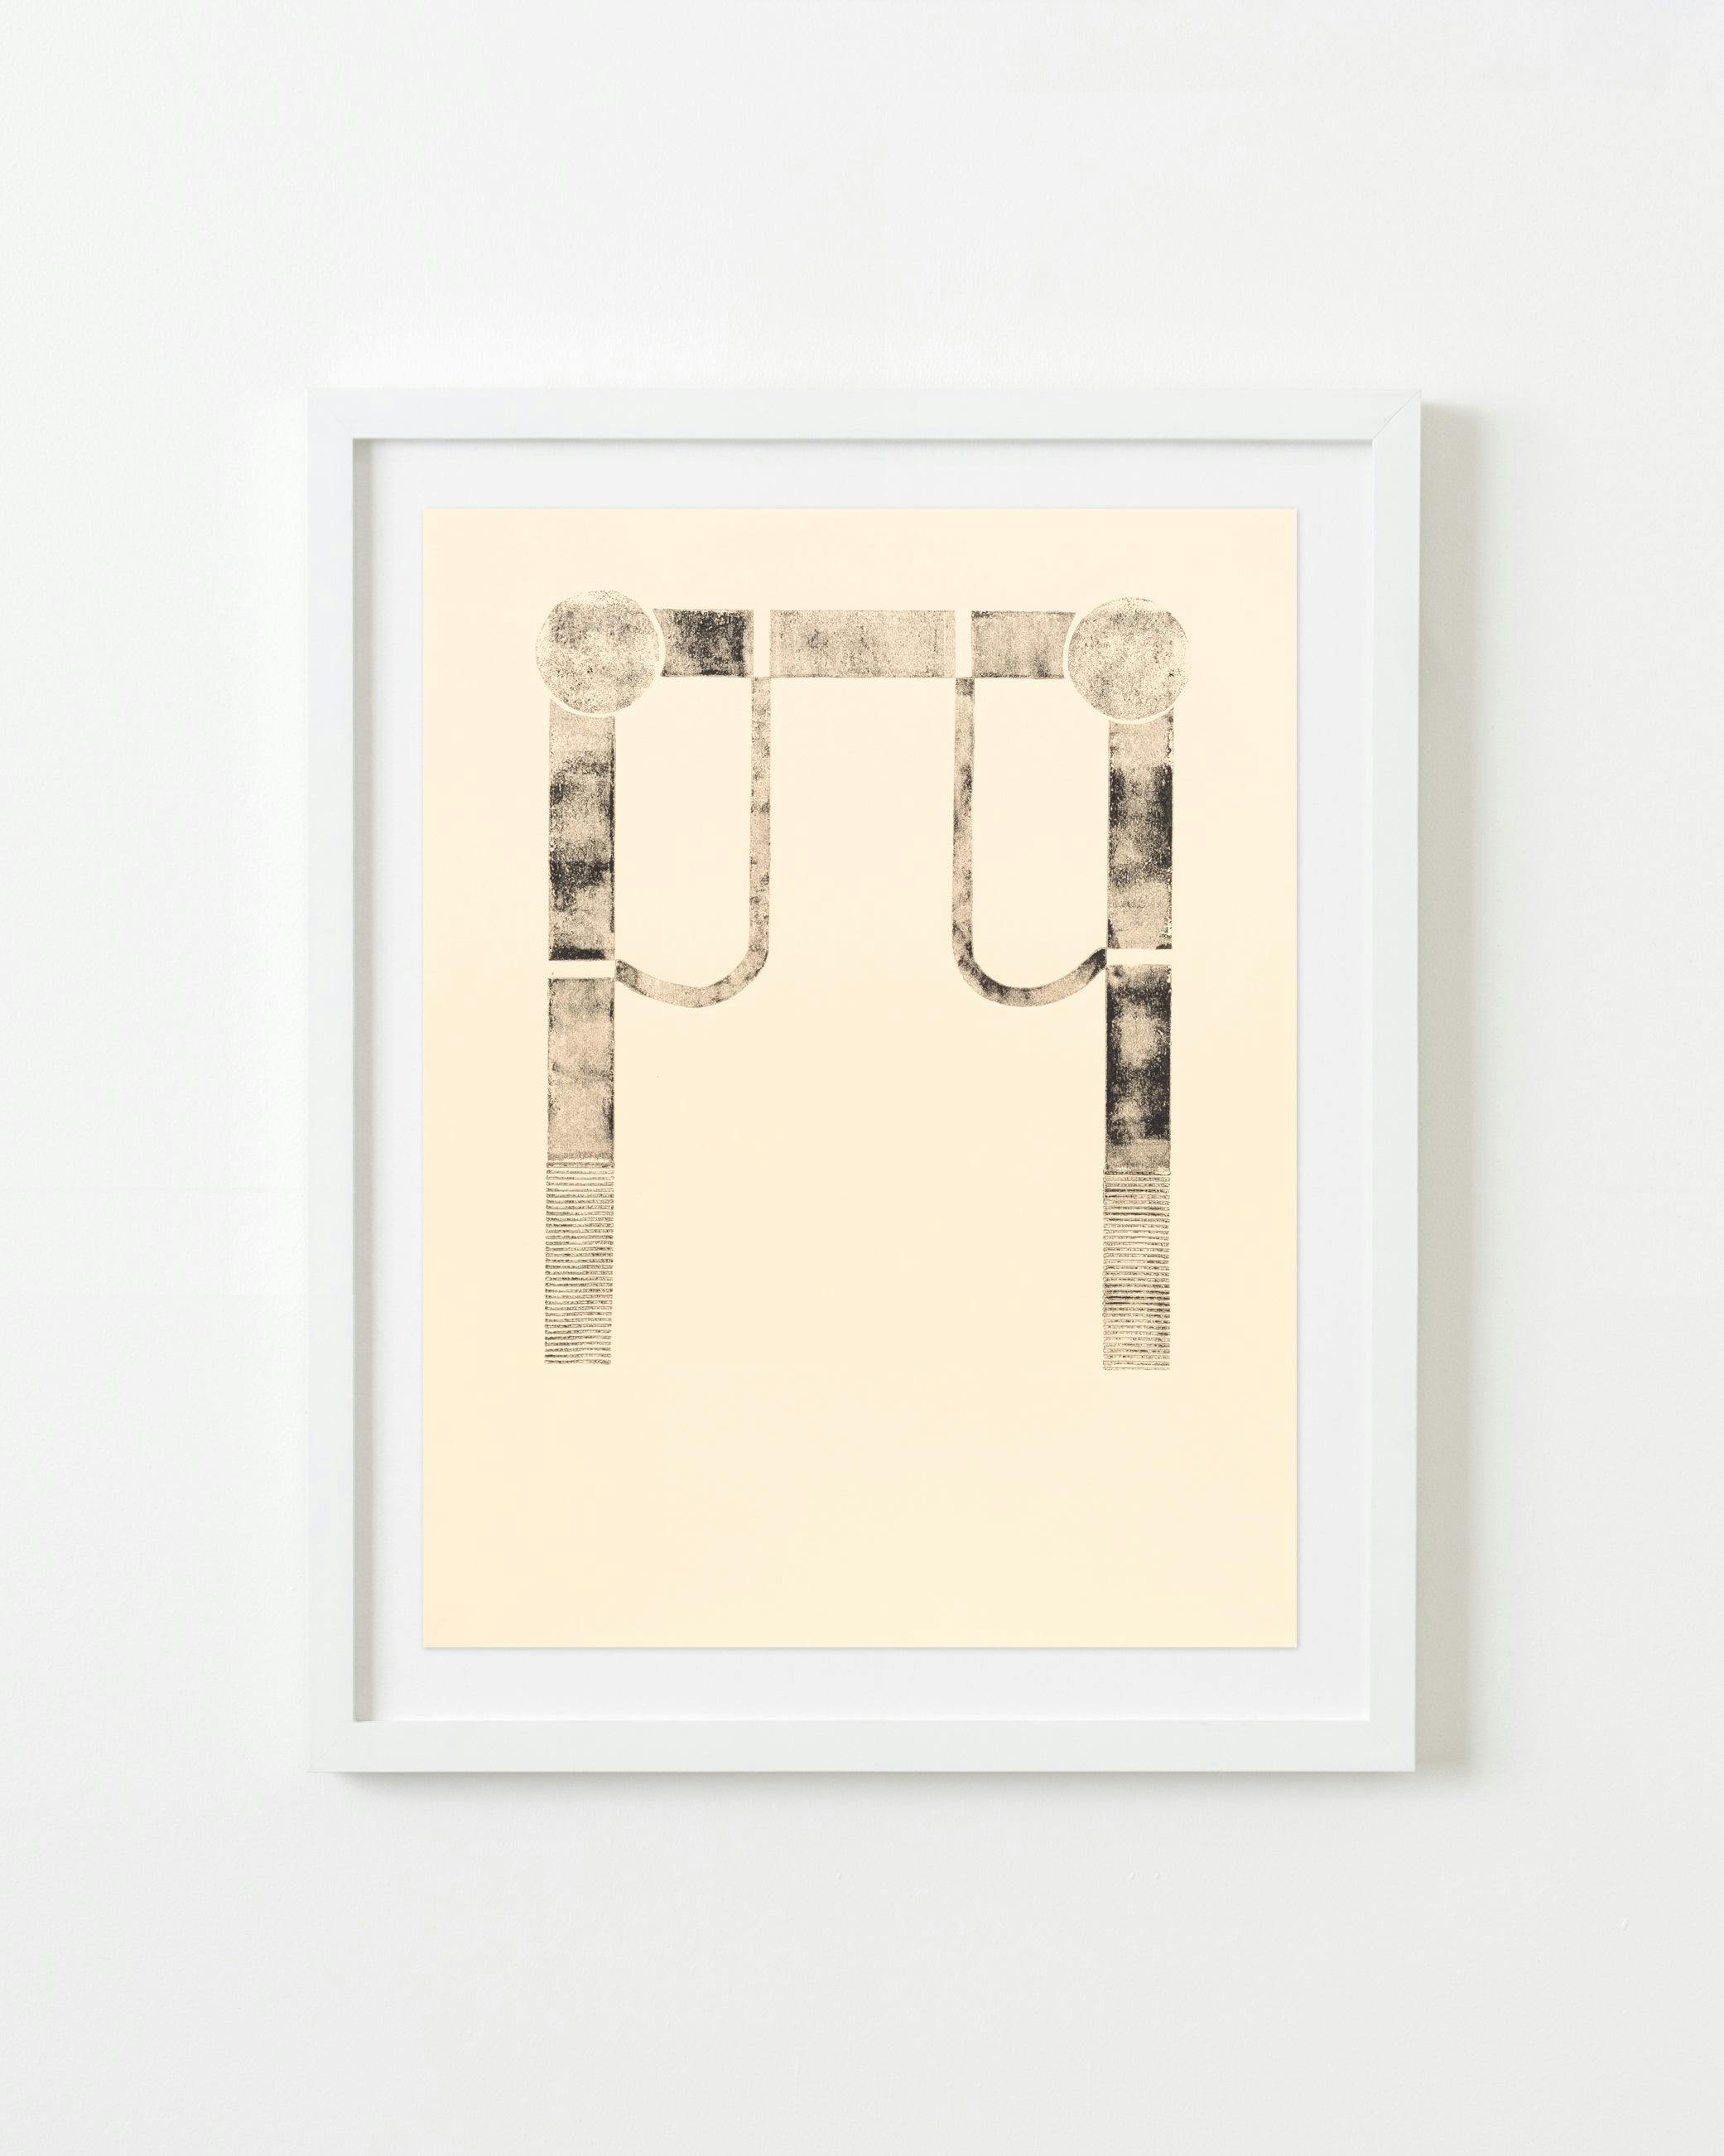 Print by Natalie Beall titled "Index of Function (Traces)".